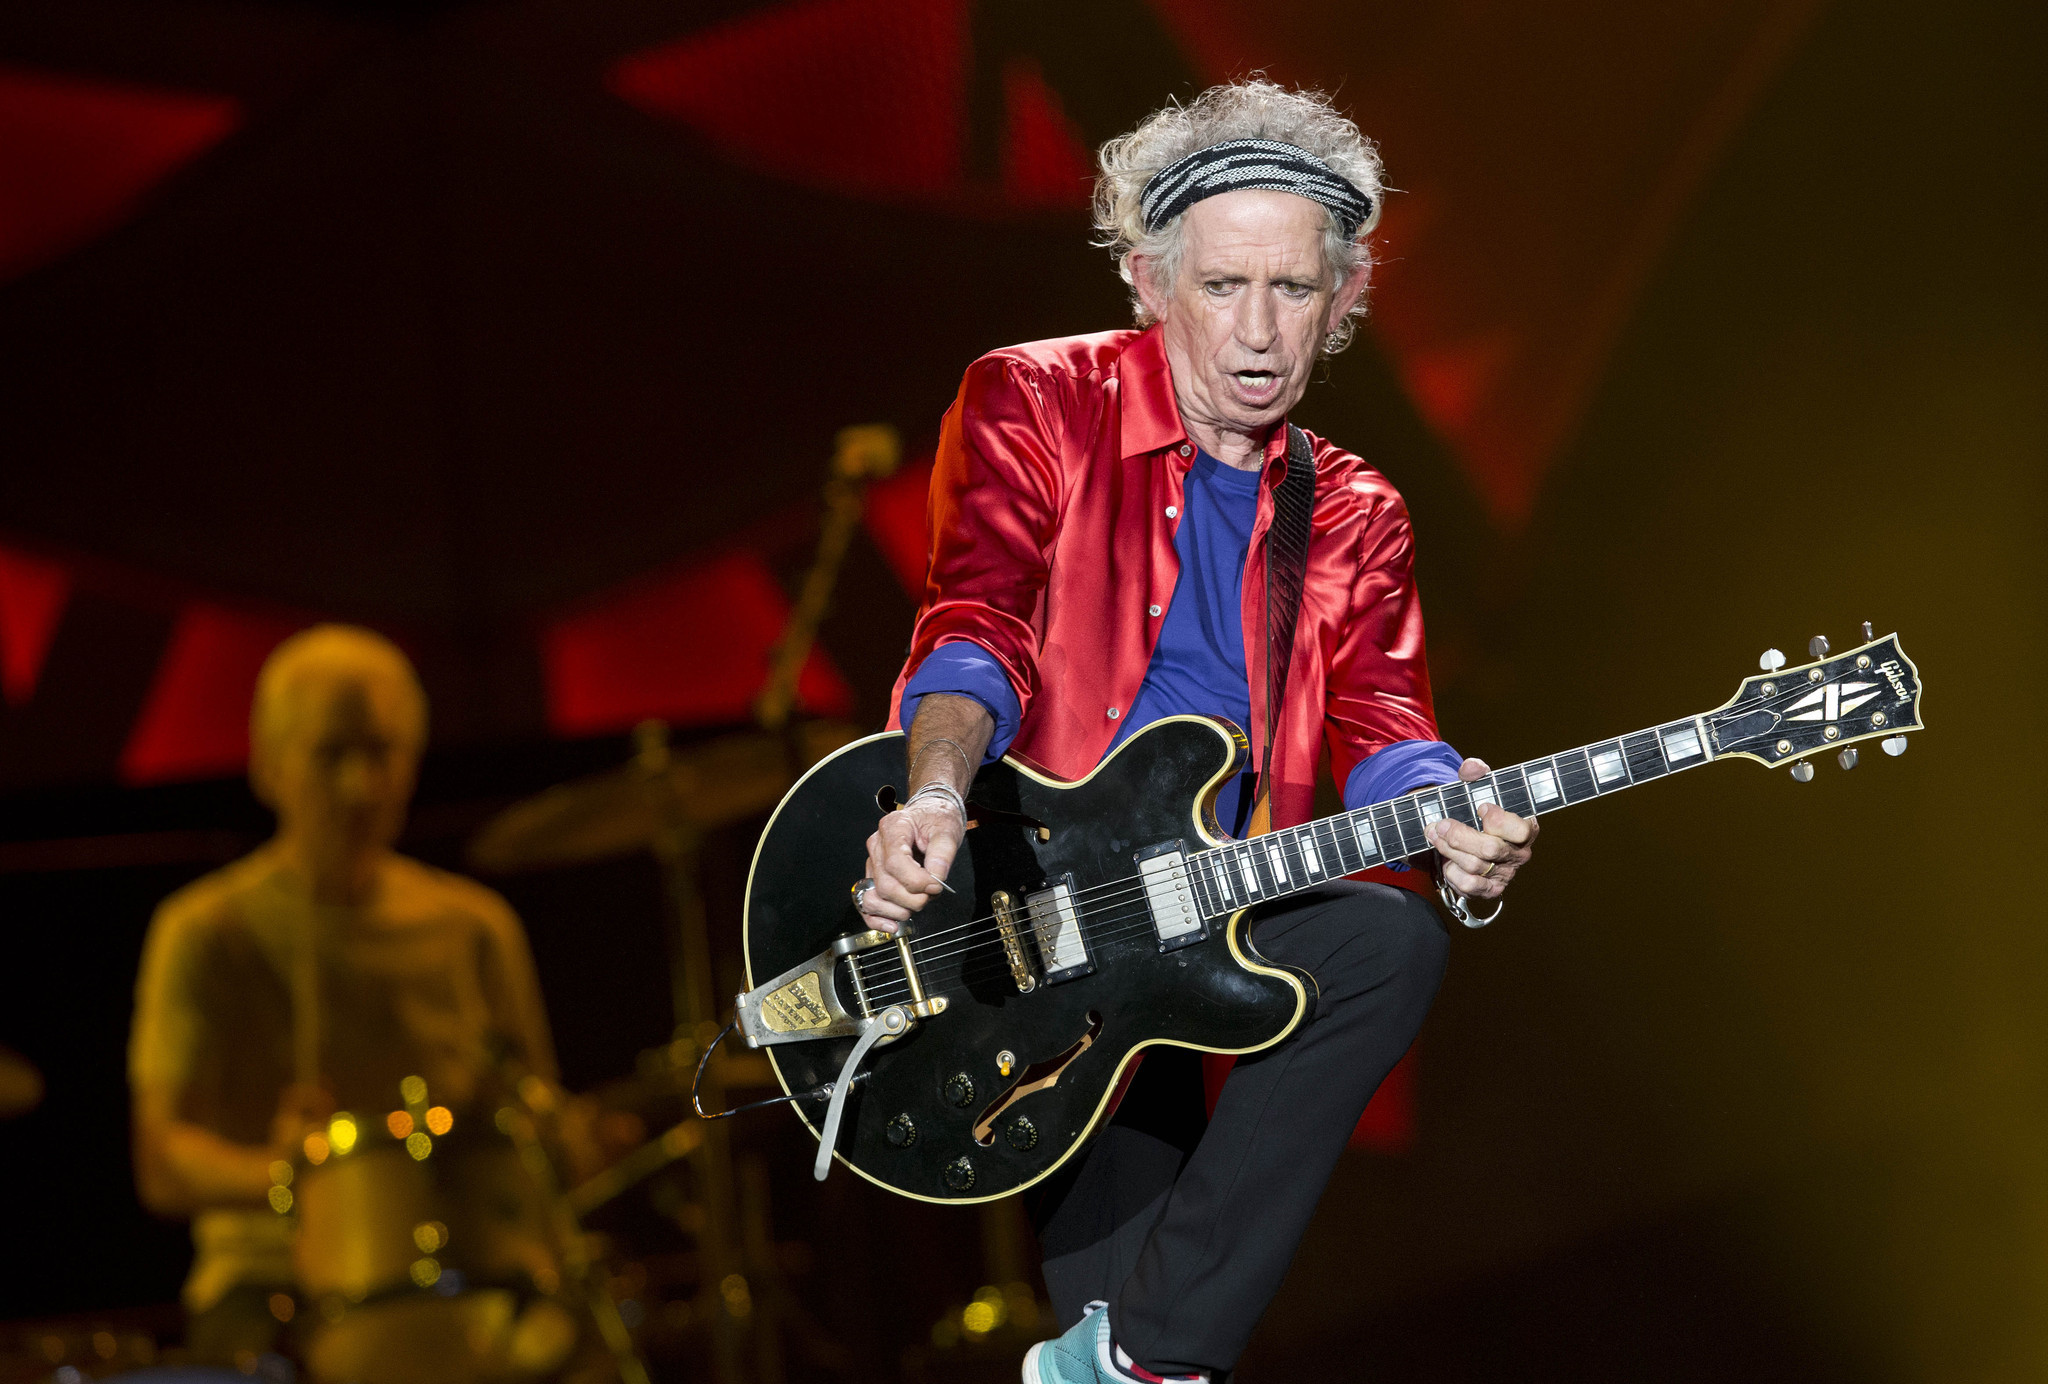 2048x1384 Keith Richards: New Rolling Stones record coming next year - Chicago Tribune